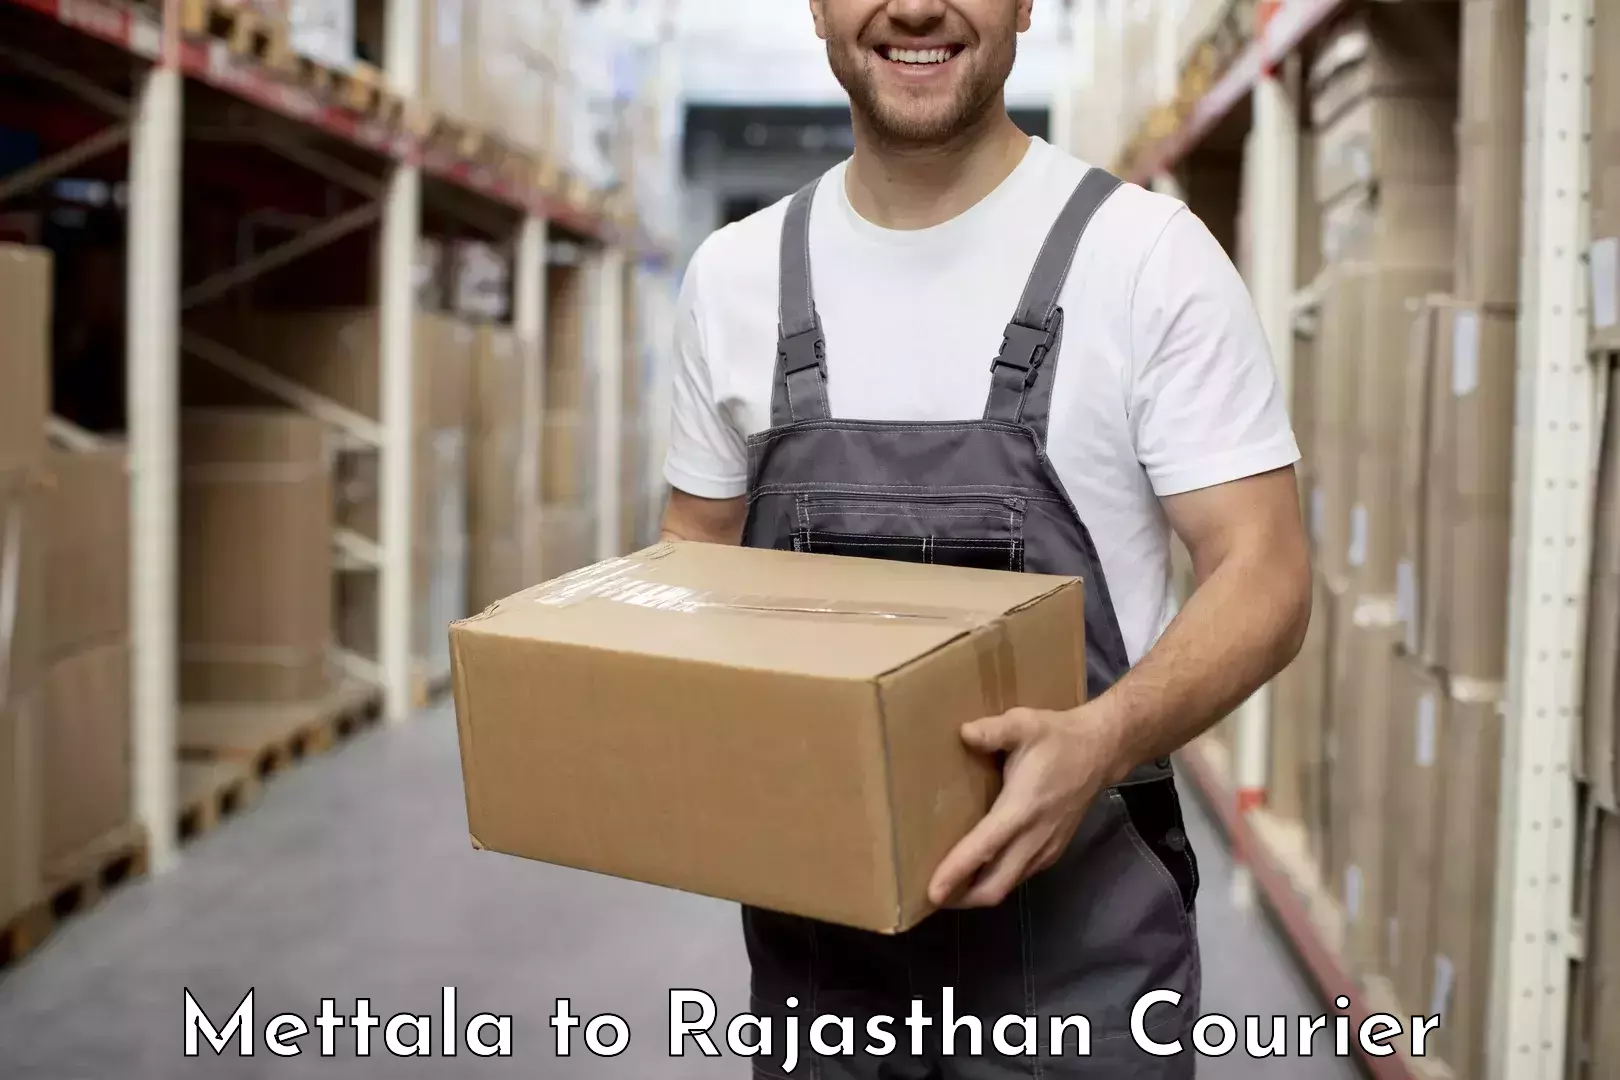 Sustainable shipping practices Mettala to Rajasthan